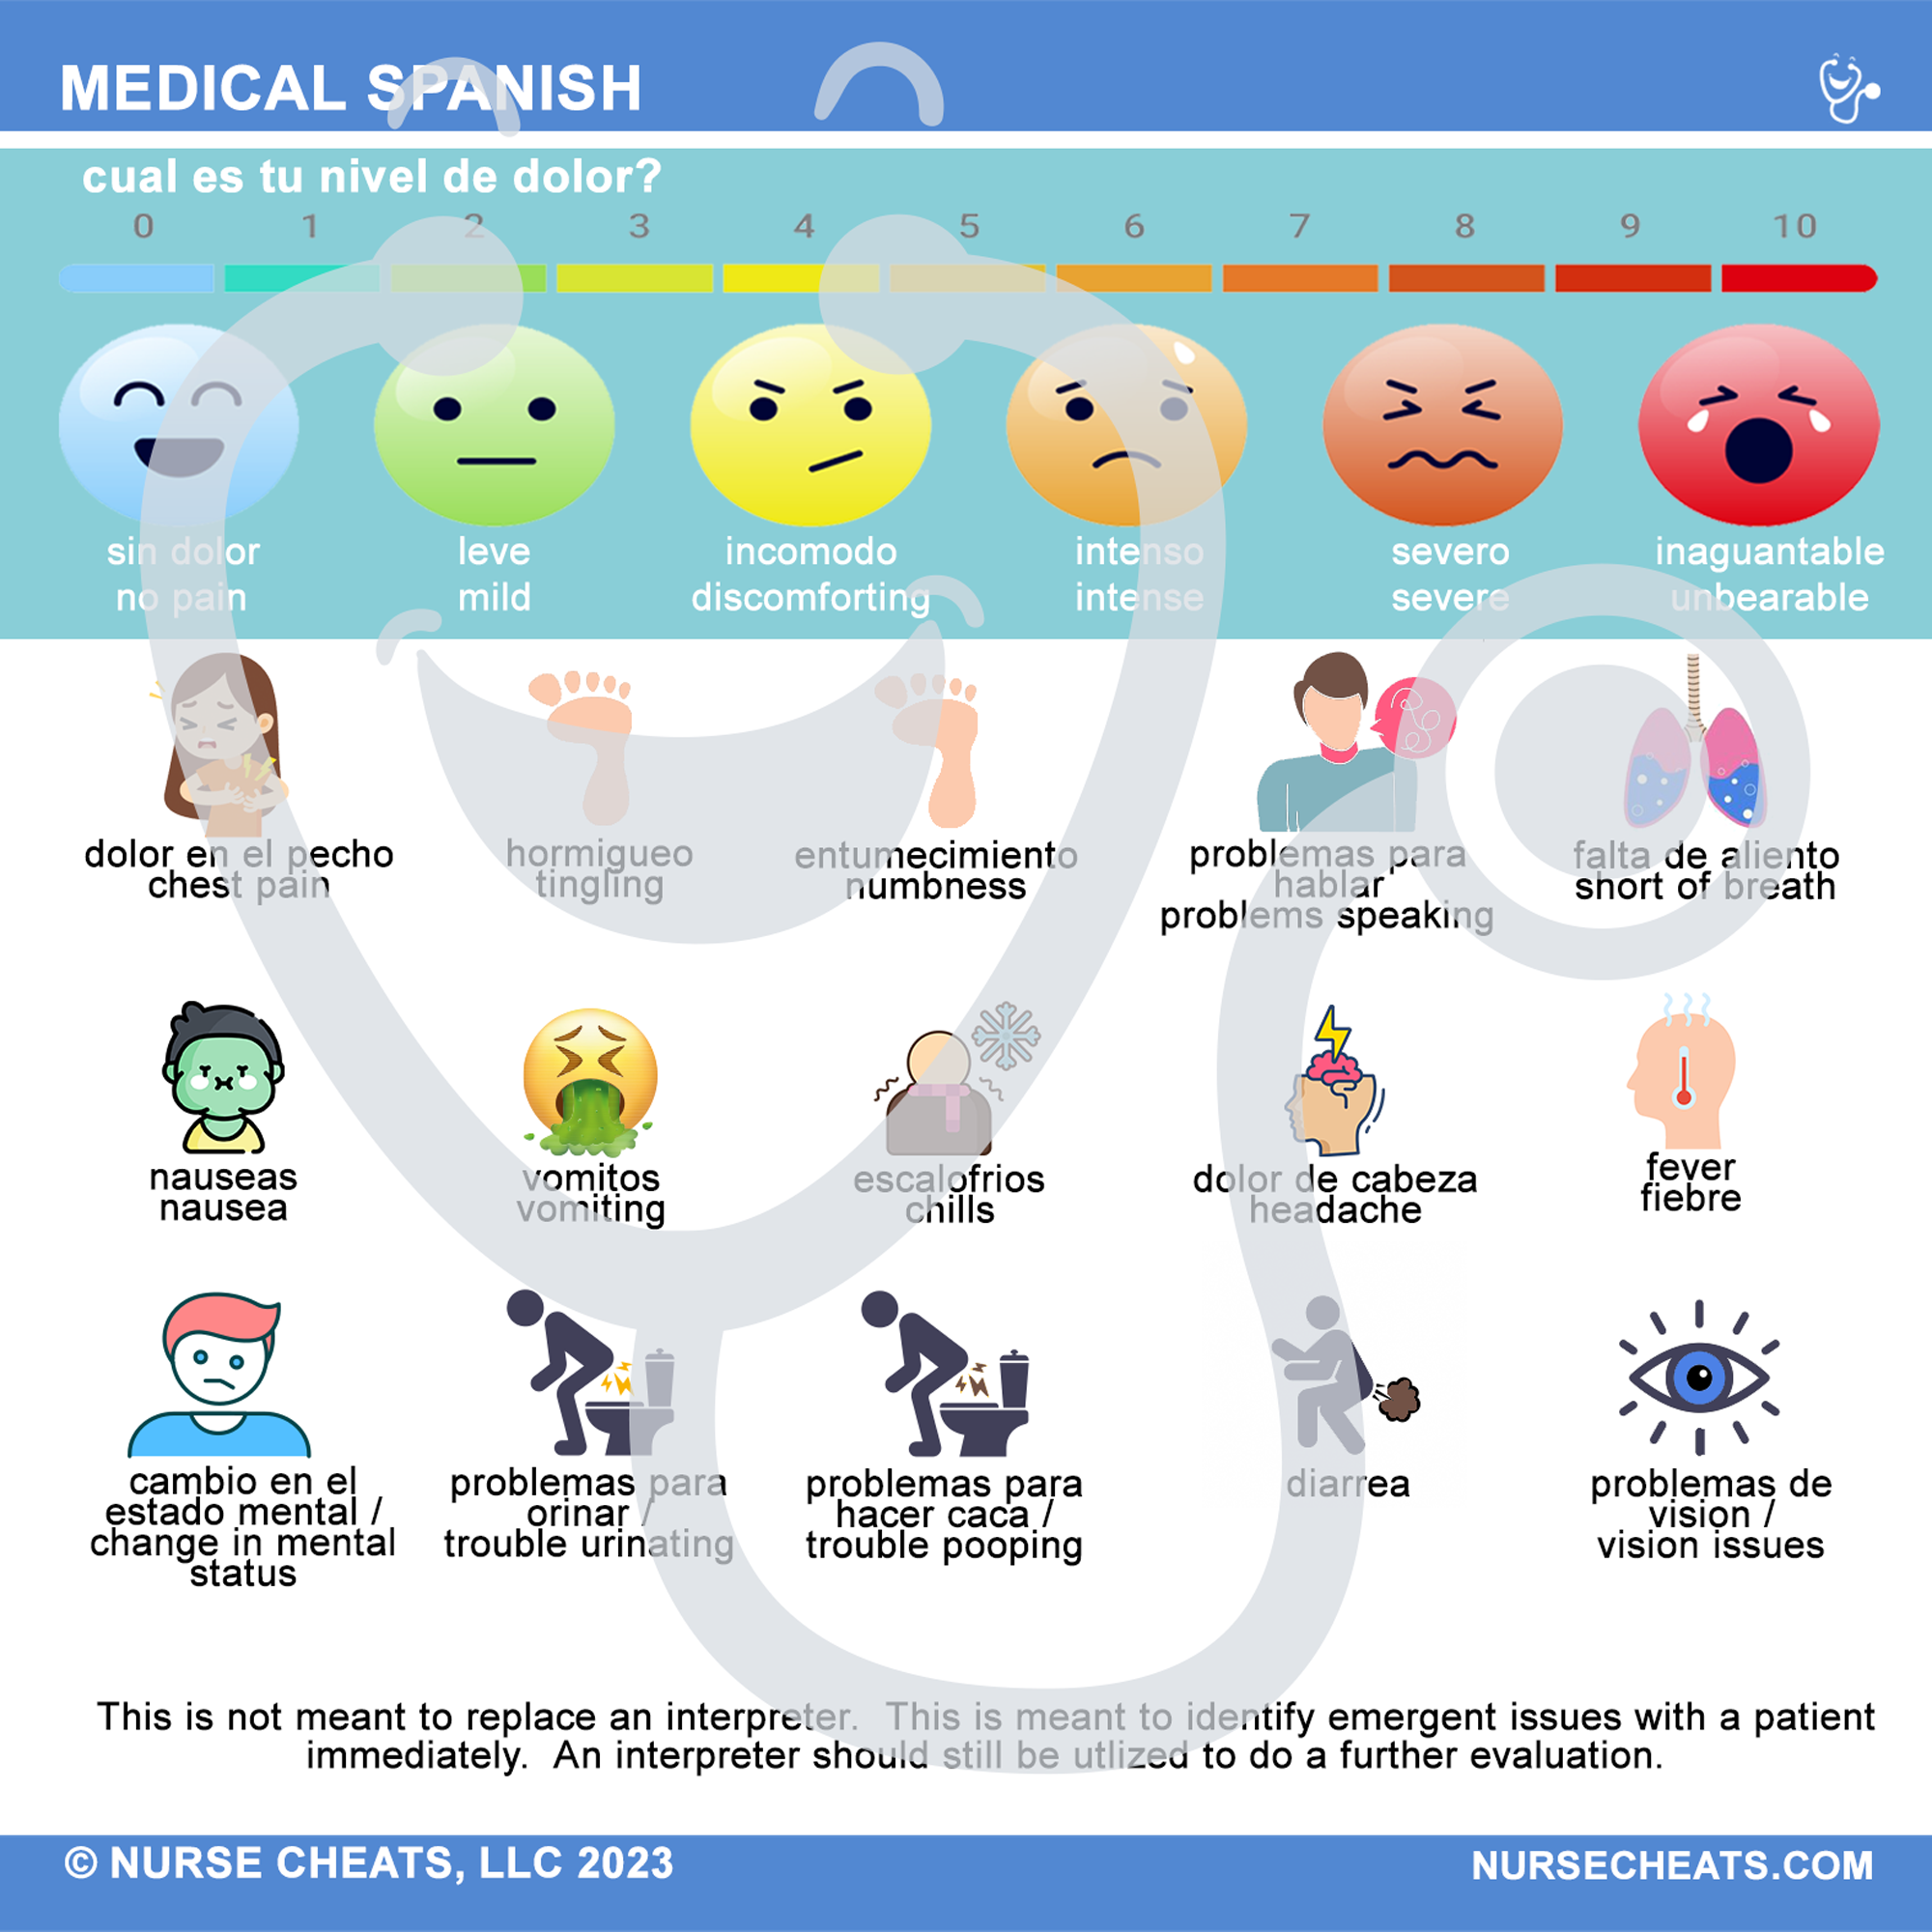 Side 2 contains a pain scale in english / spanish as well as presenting symptoms in both english / spanish